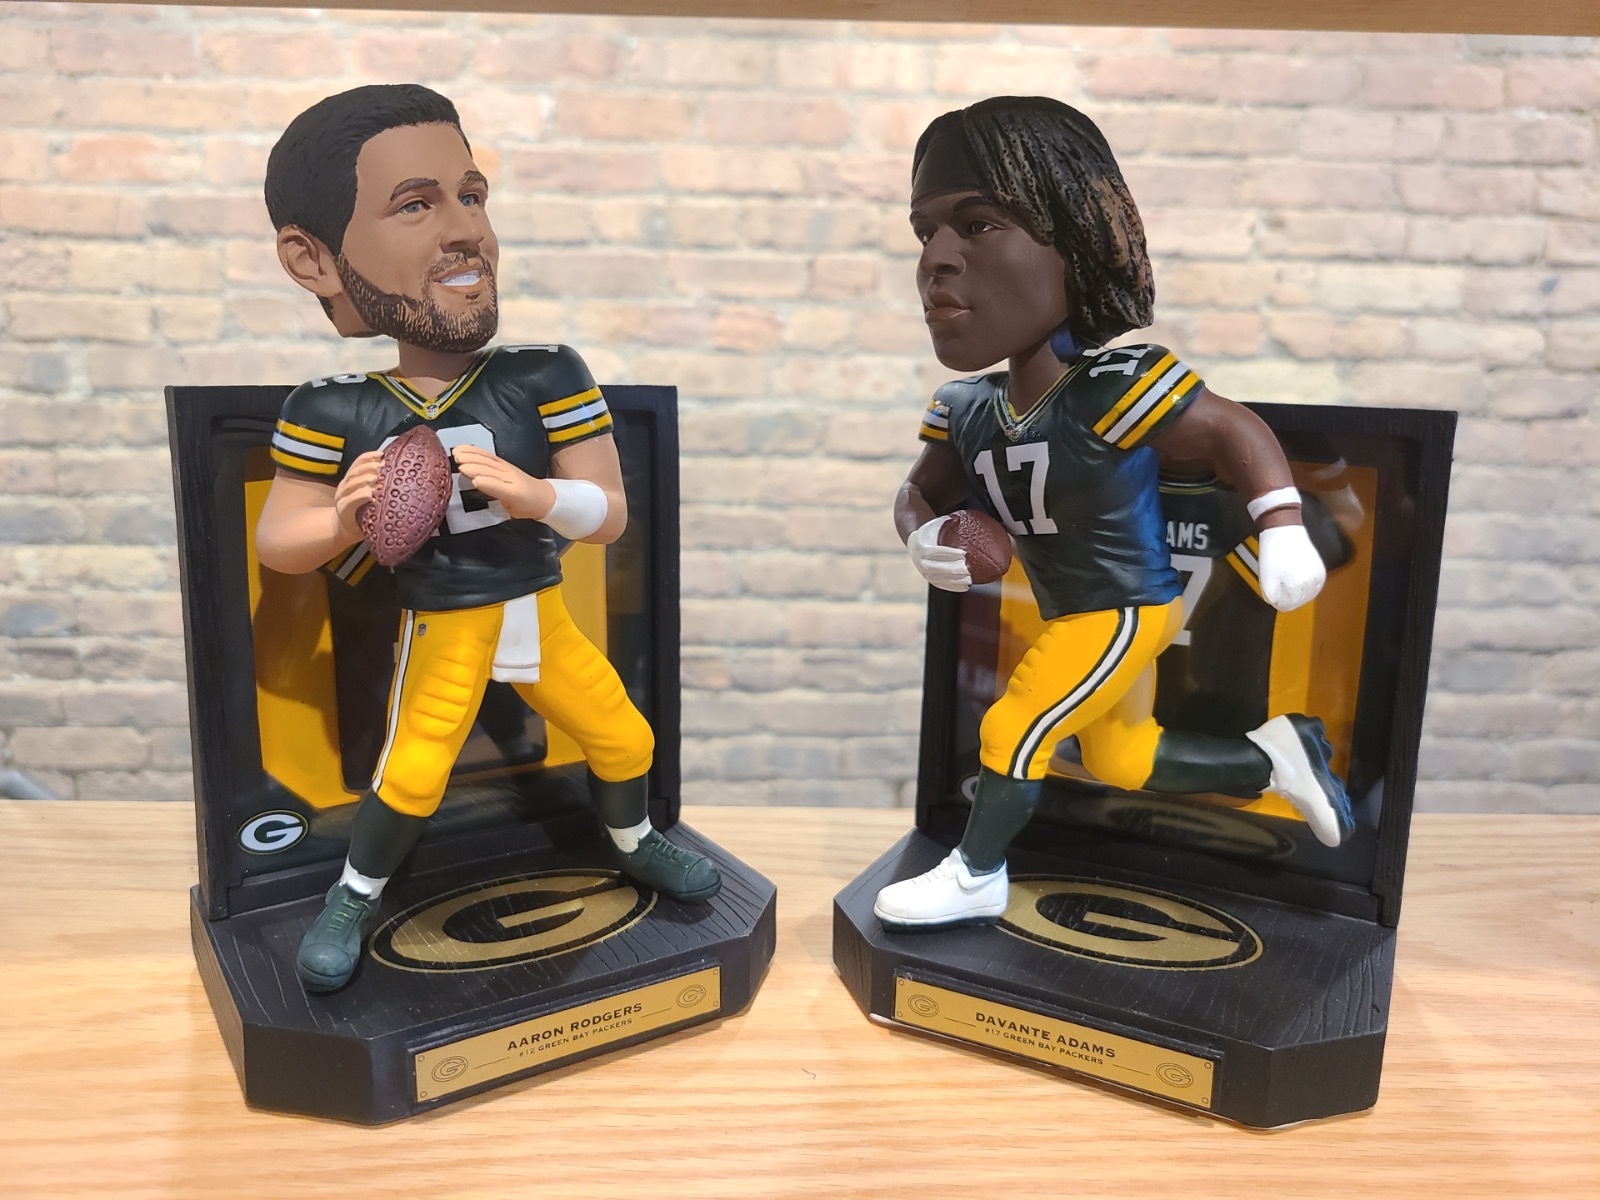 Bobblehead Hall of Fame and Museum releases two new Rodgers, Adams